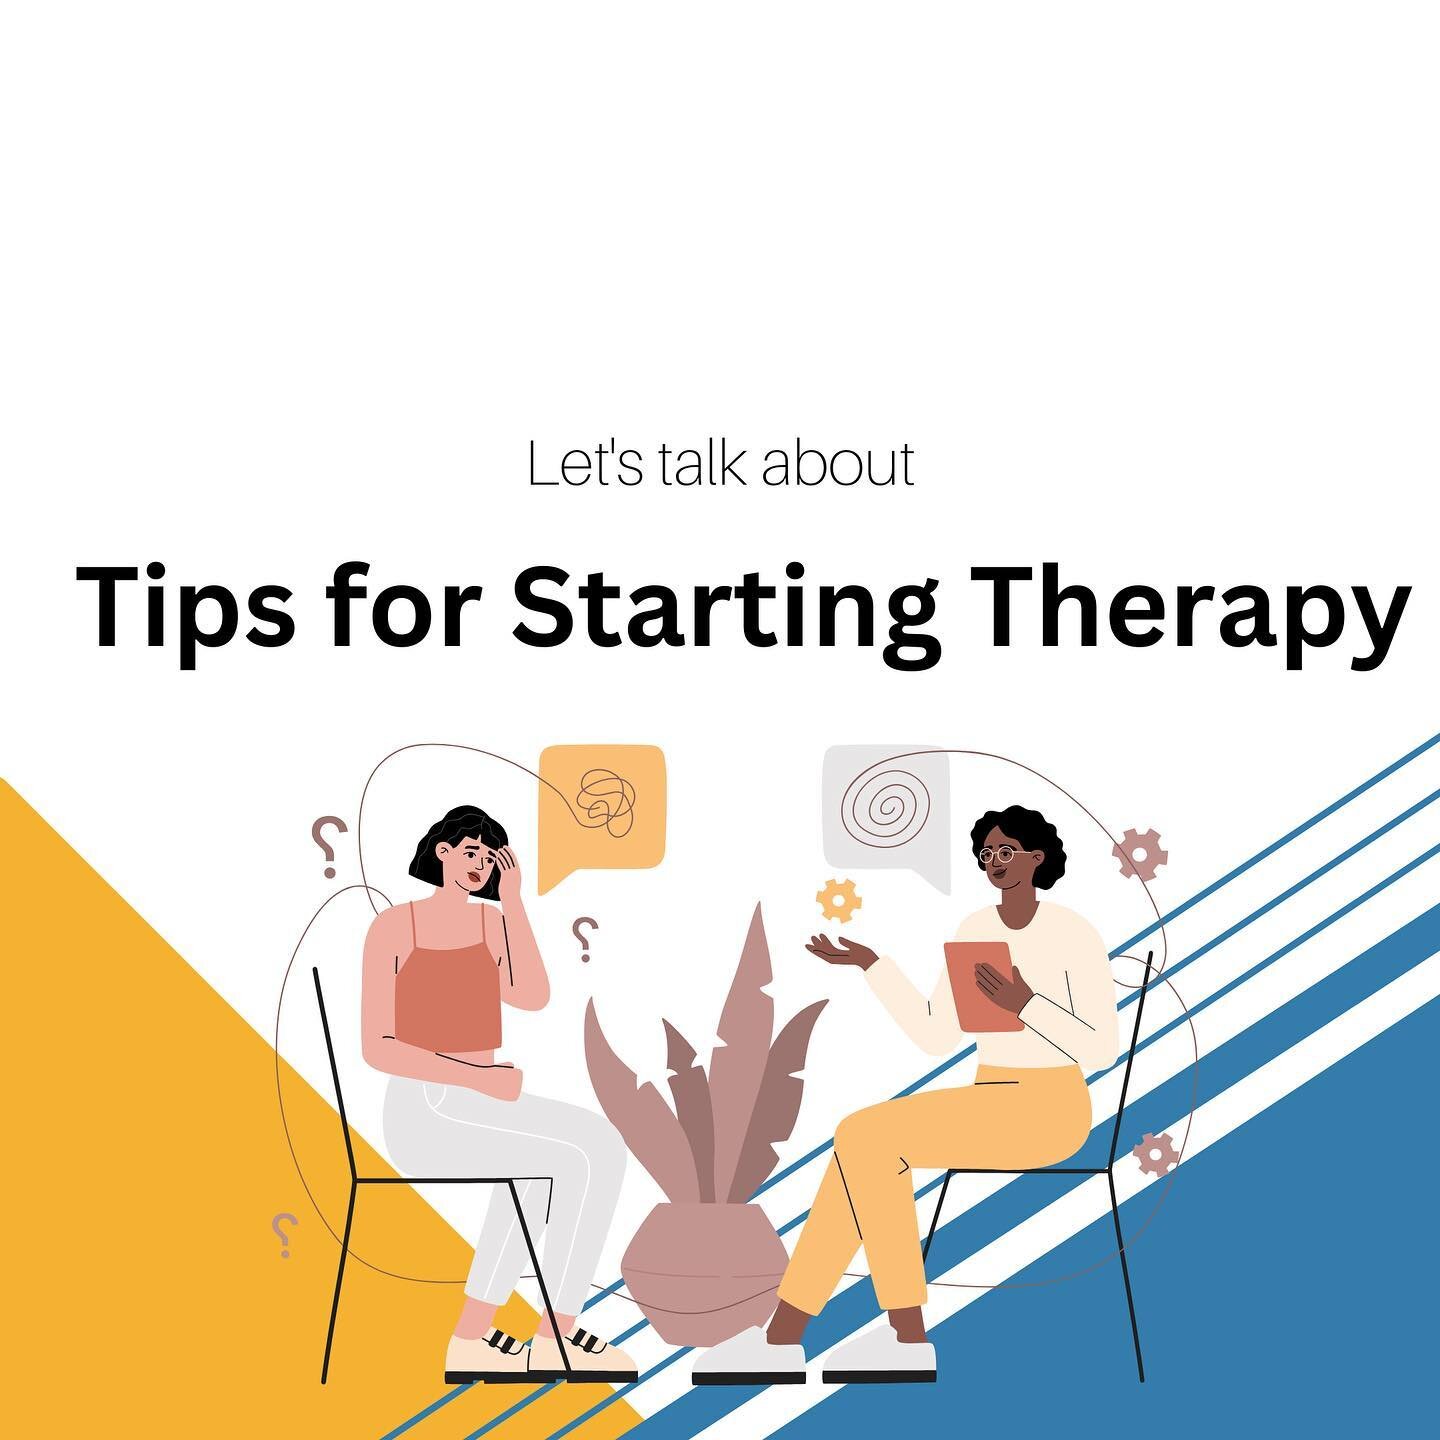 Thinking about starting Therapy?

These slides provide a guide to some of the process and things to think about along the way.

#mentalhealth #therapy #victoria